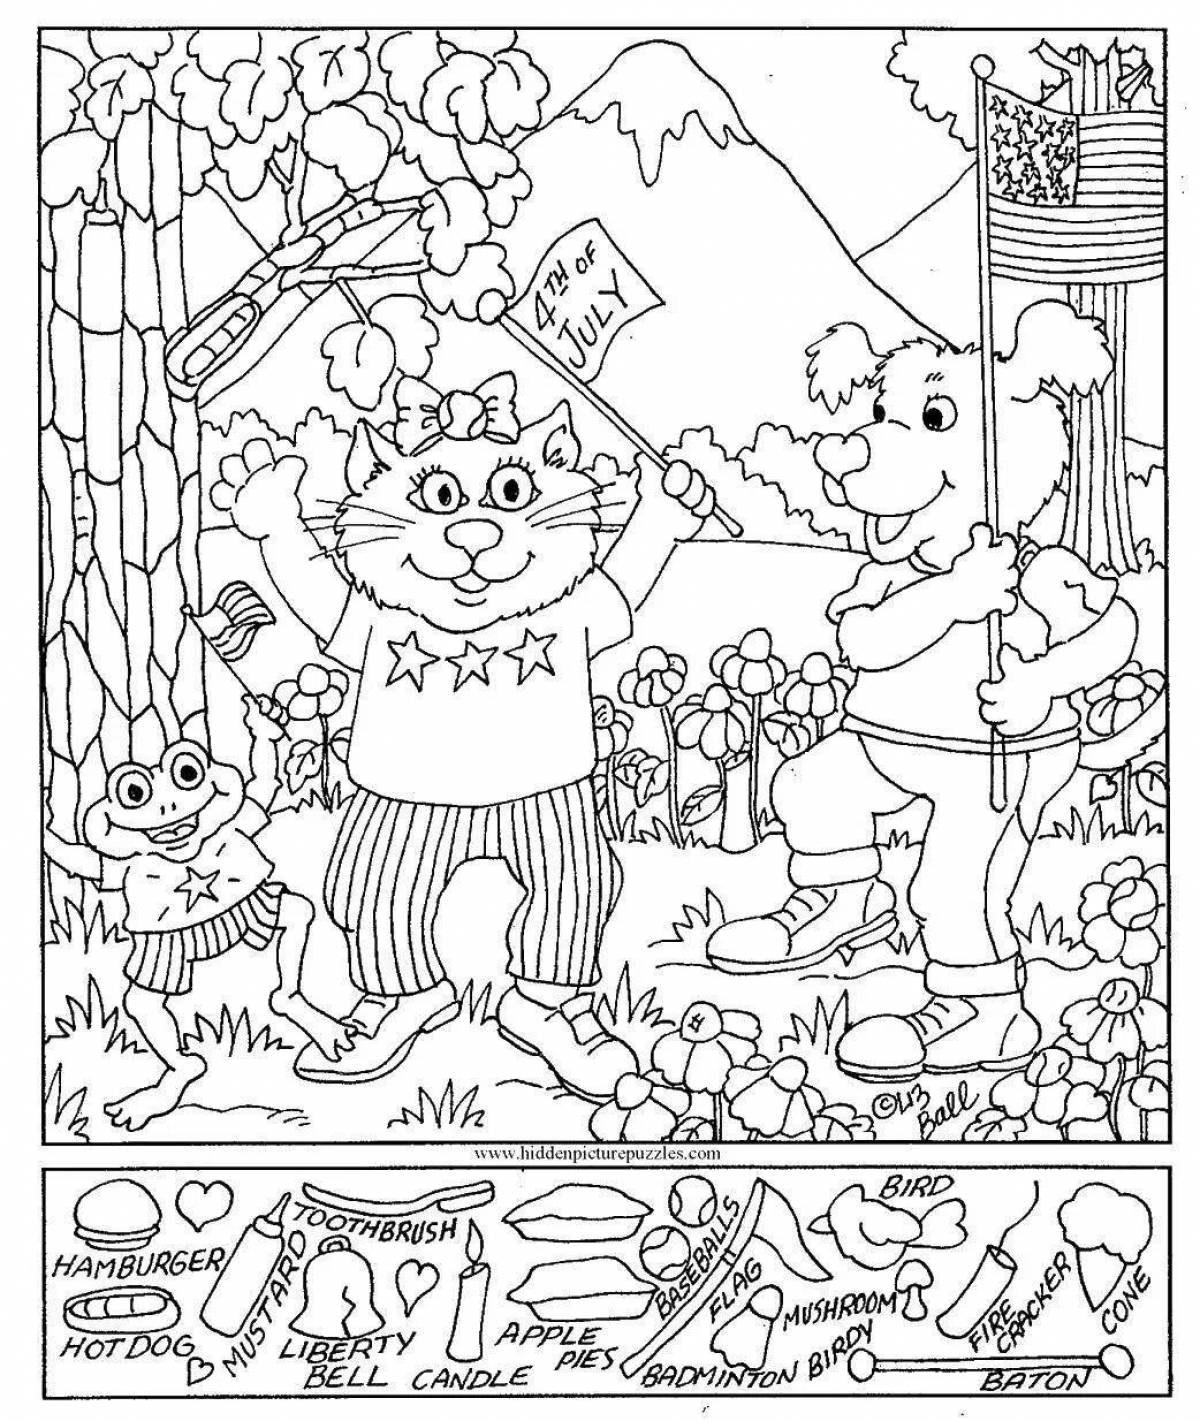 Relaxing mindfulness coloring book